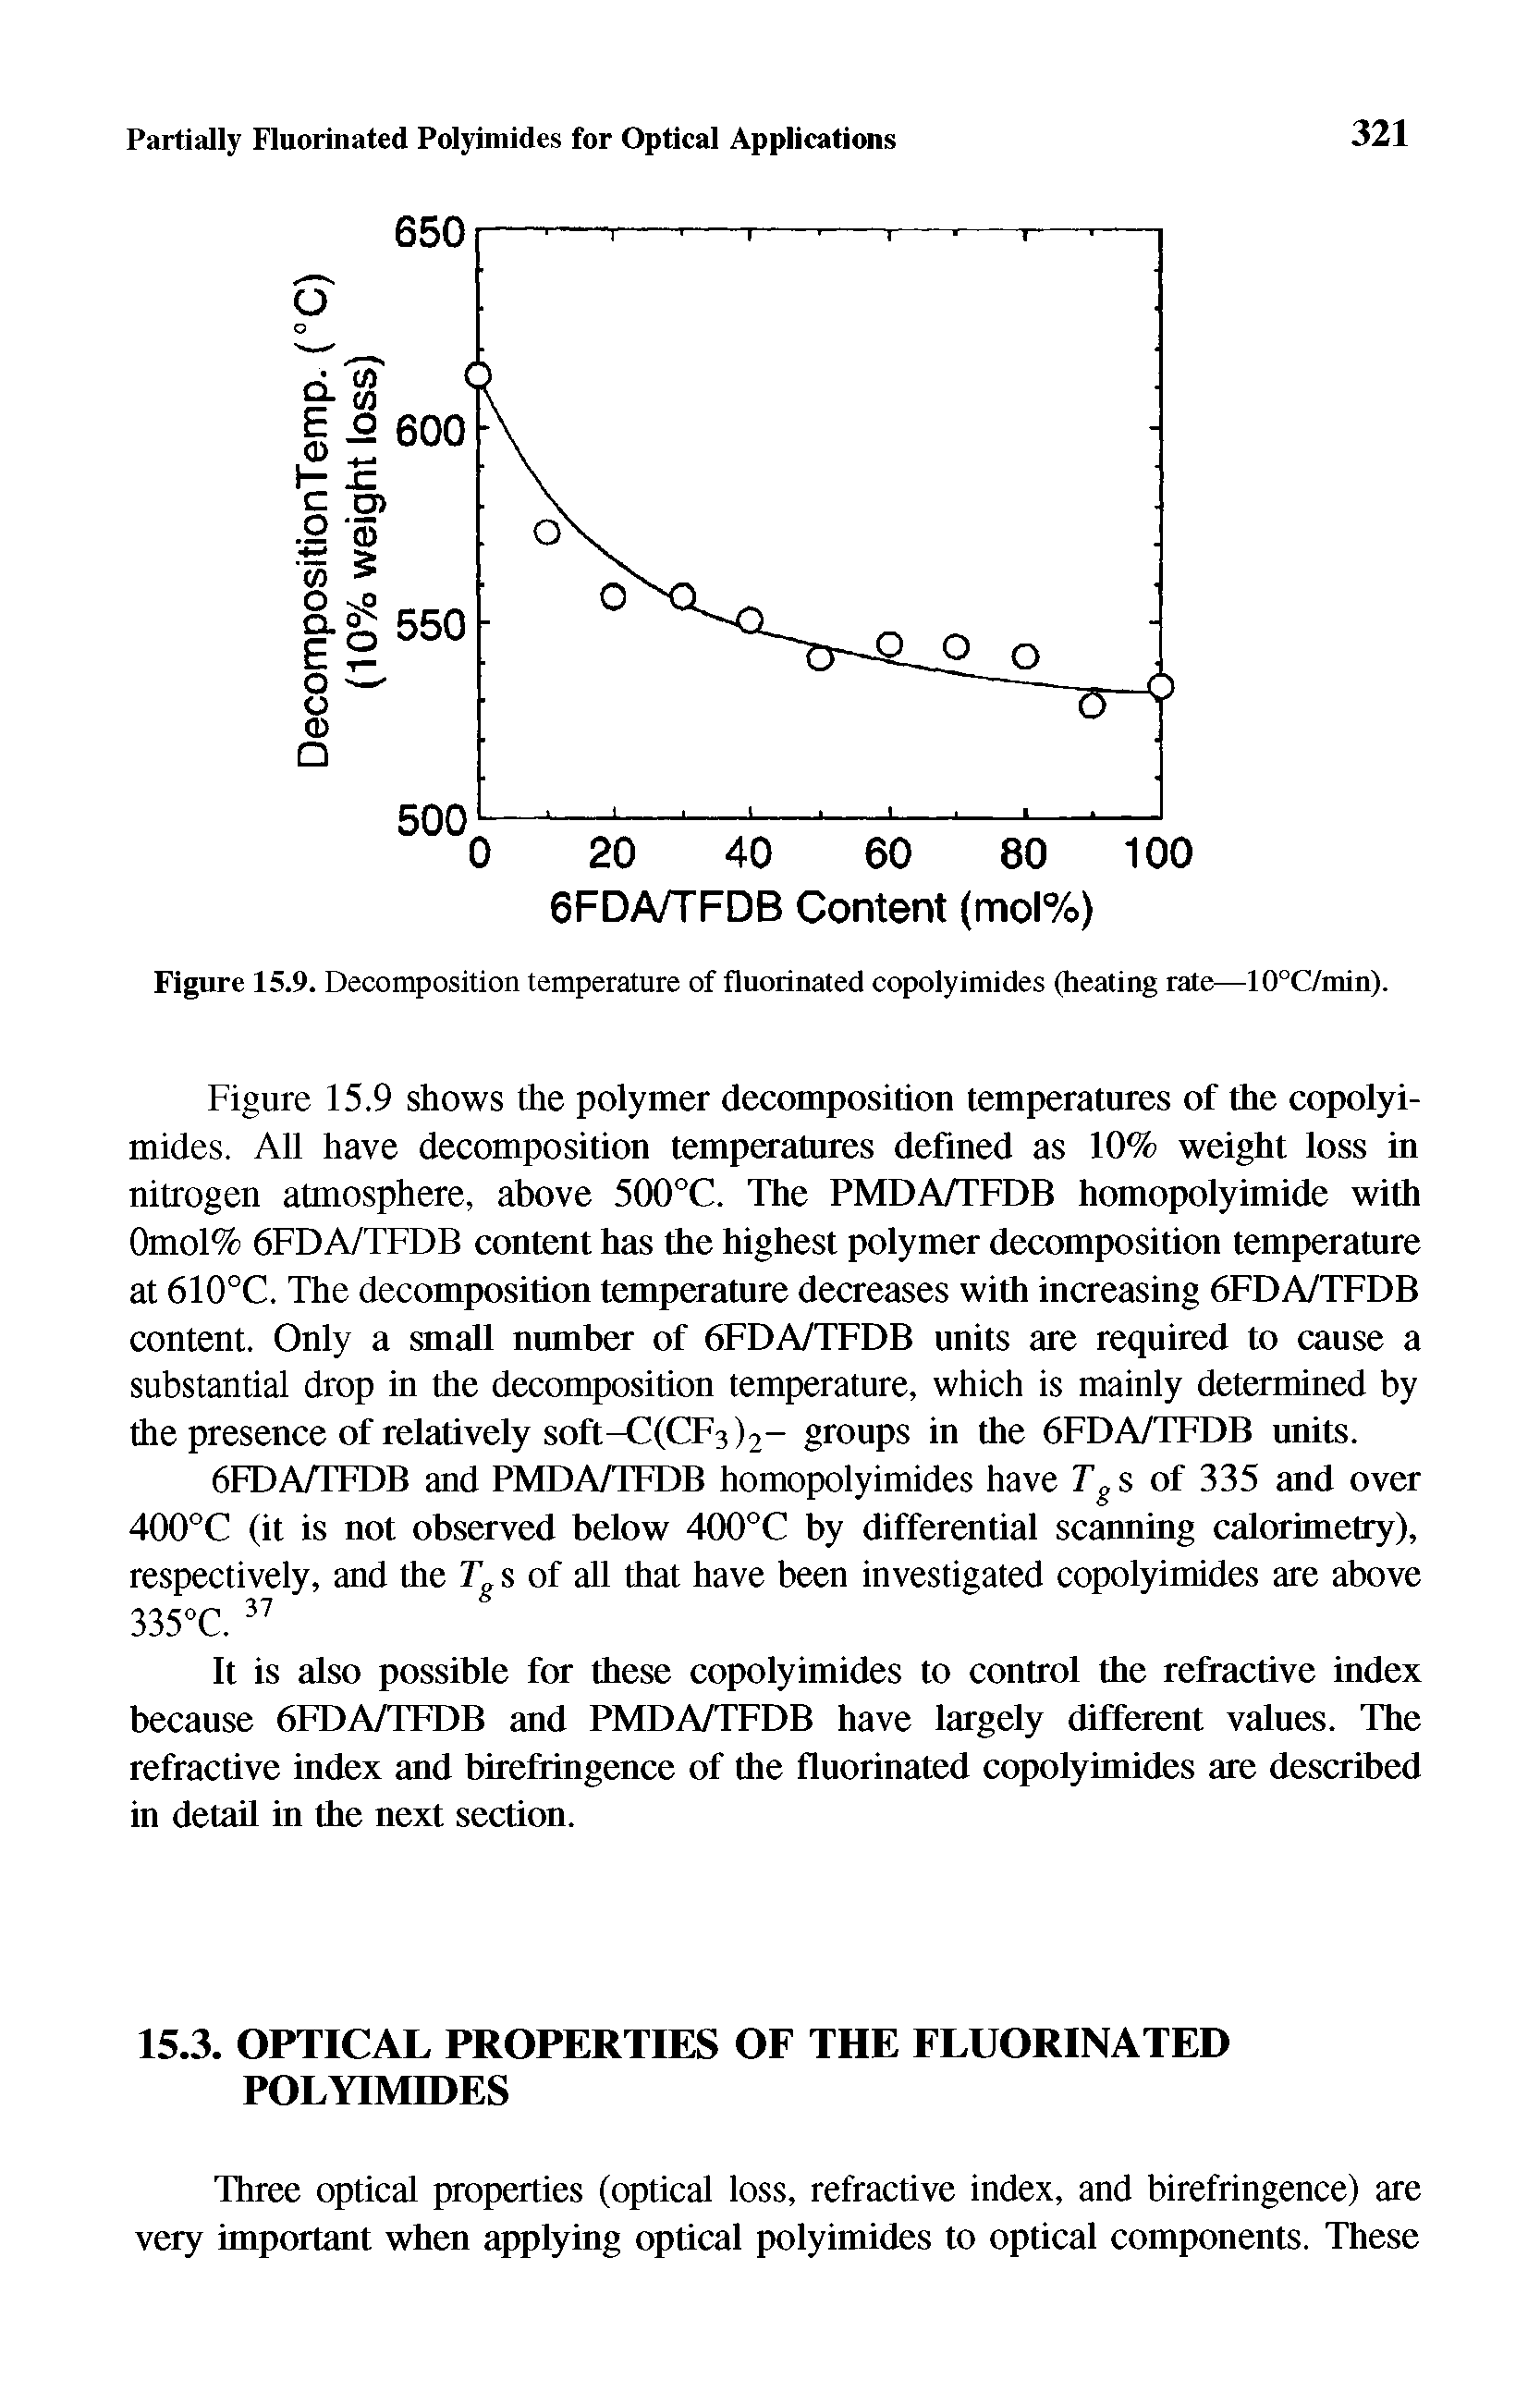 Figure 15.9. Decomposition temperature of fluorinated copolyimides (heating rate—10°C/min).